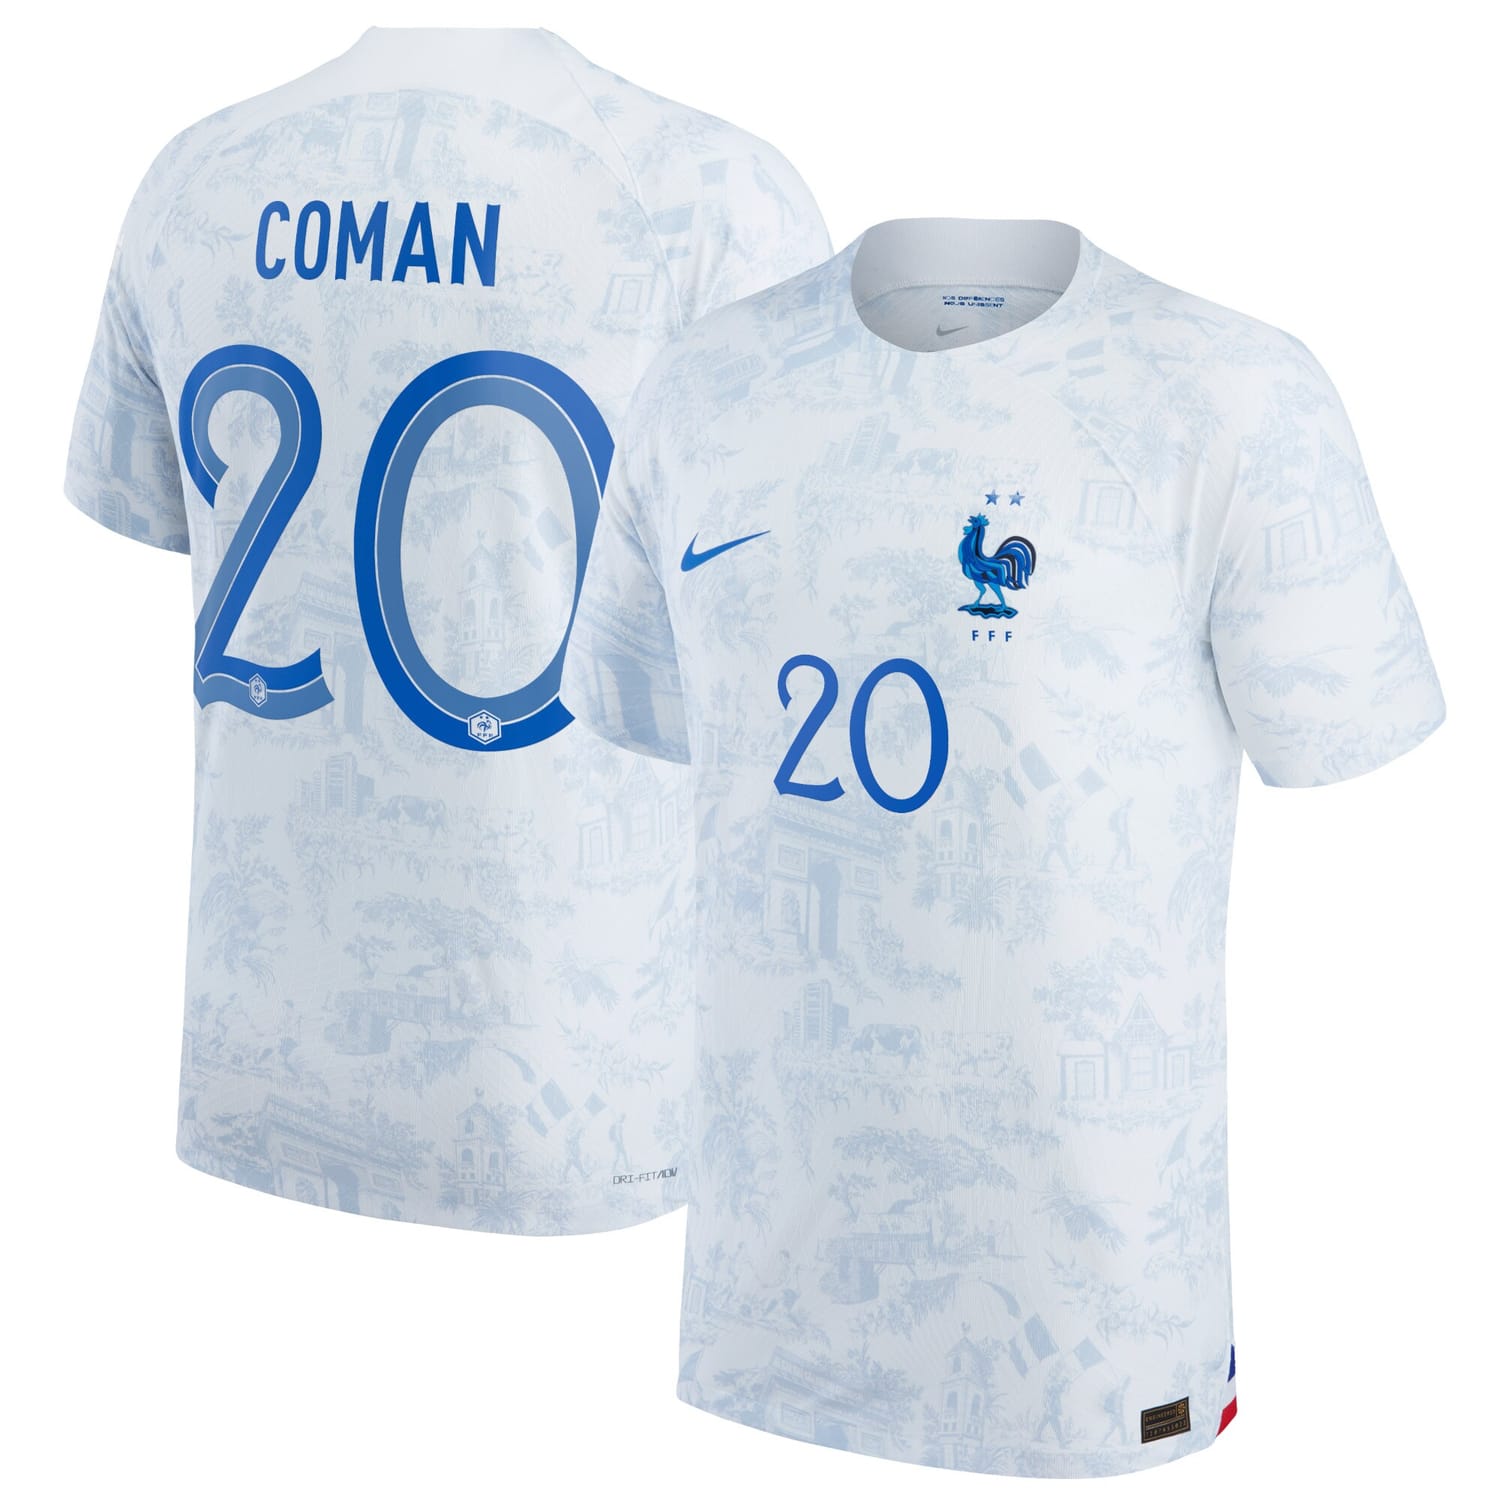 France National Team Away Authentic Jersey Shirt 2022 player Kingsley Coman printing for Men